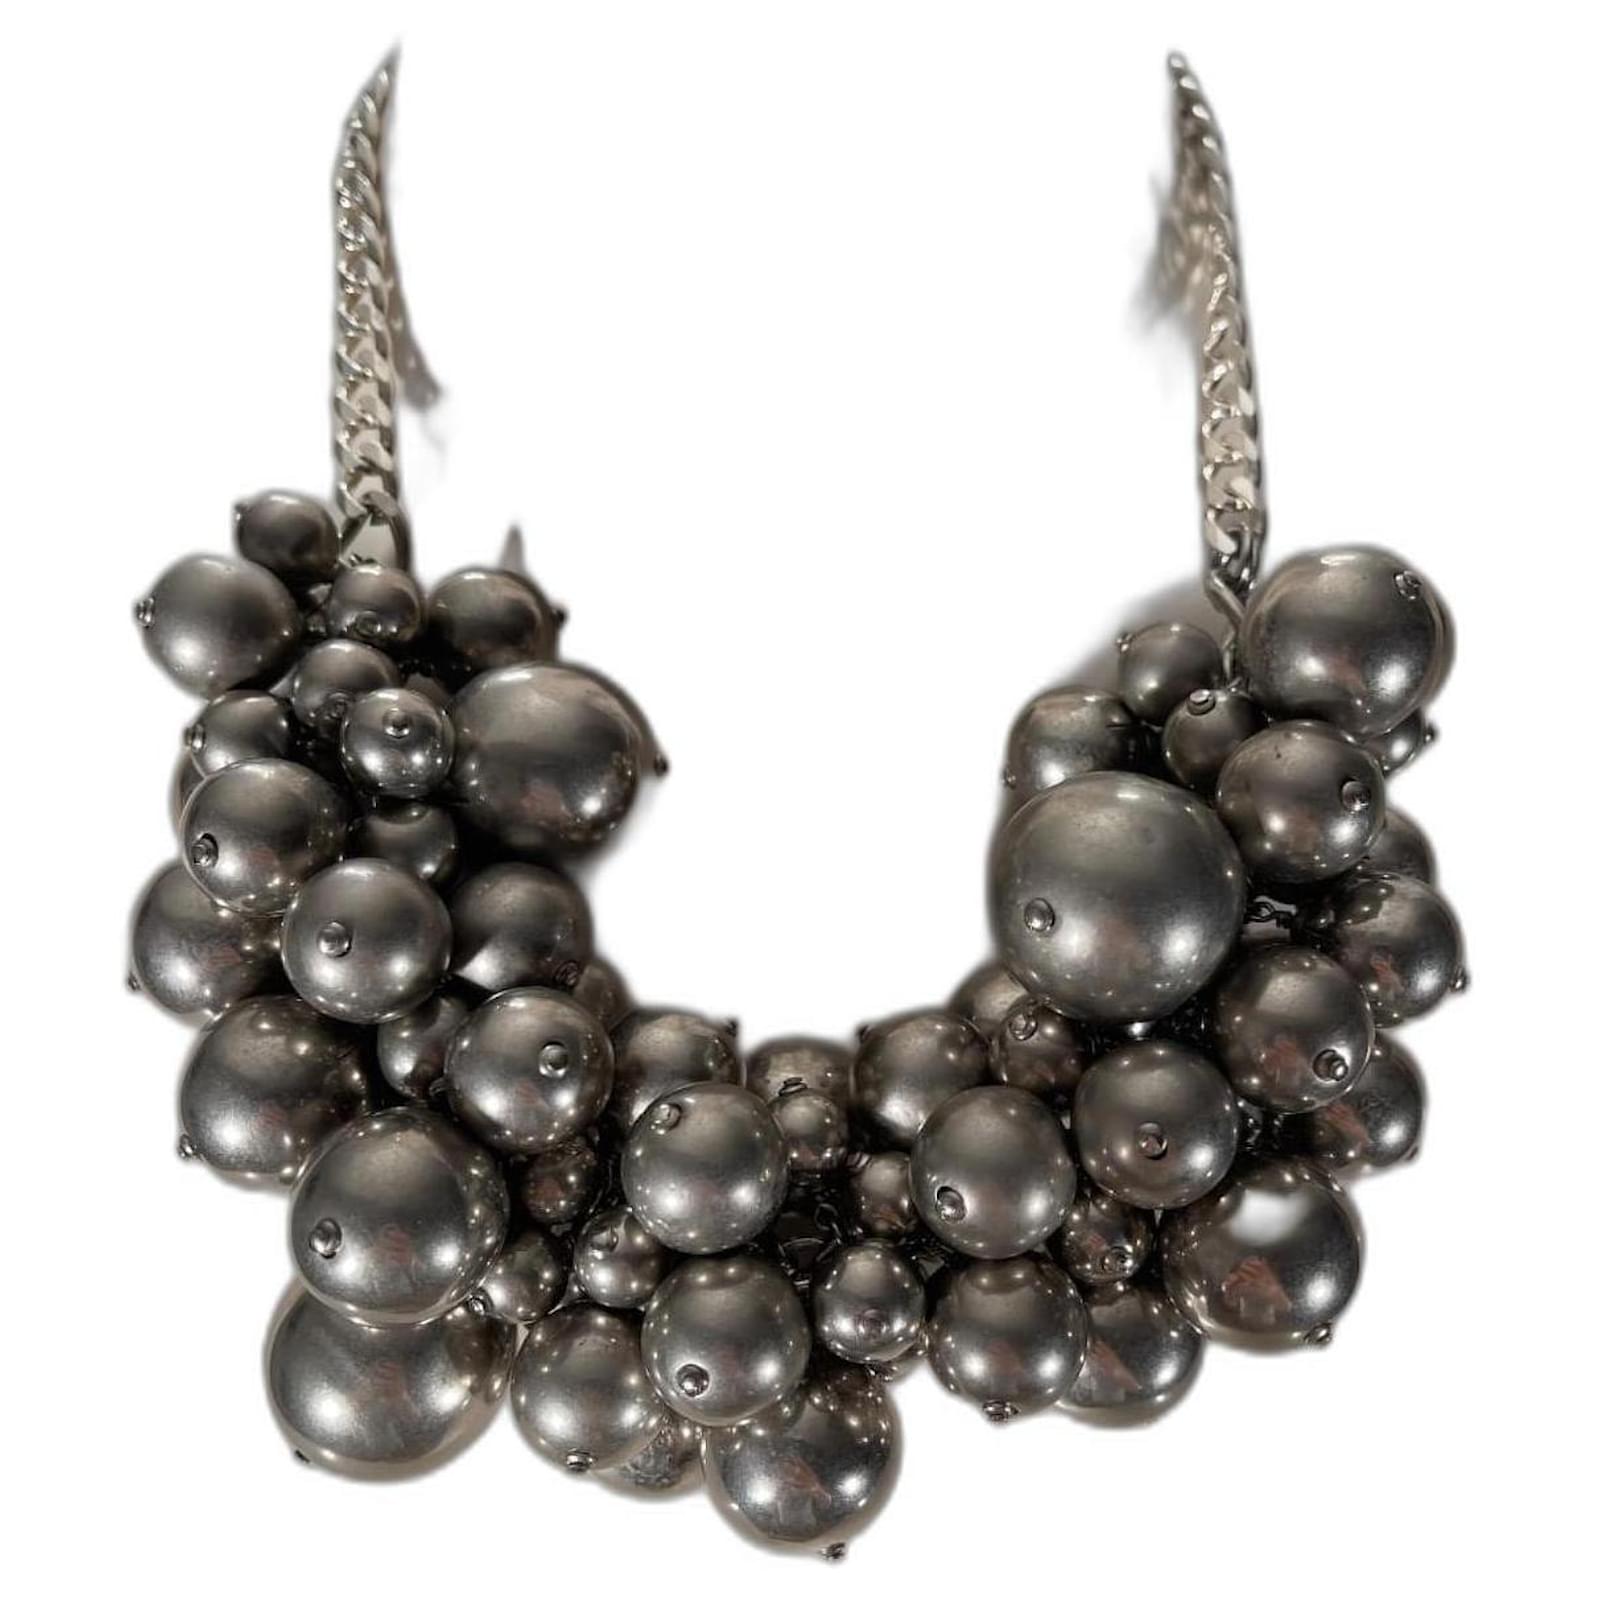 Pearl necklace / choker Chanel collection 2013 Silvery Grey ref